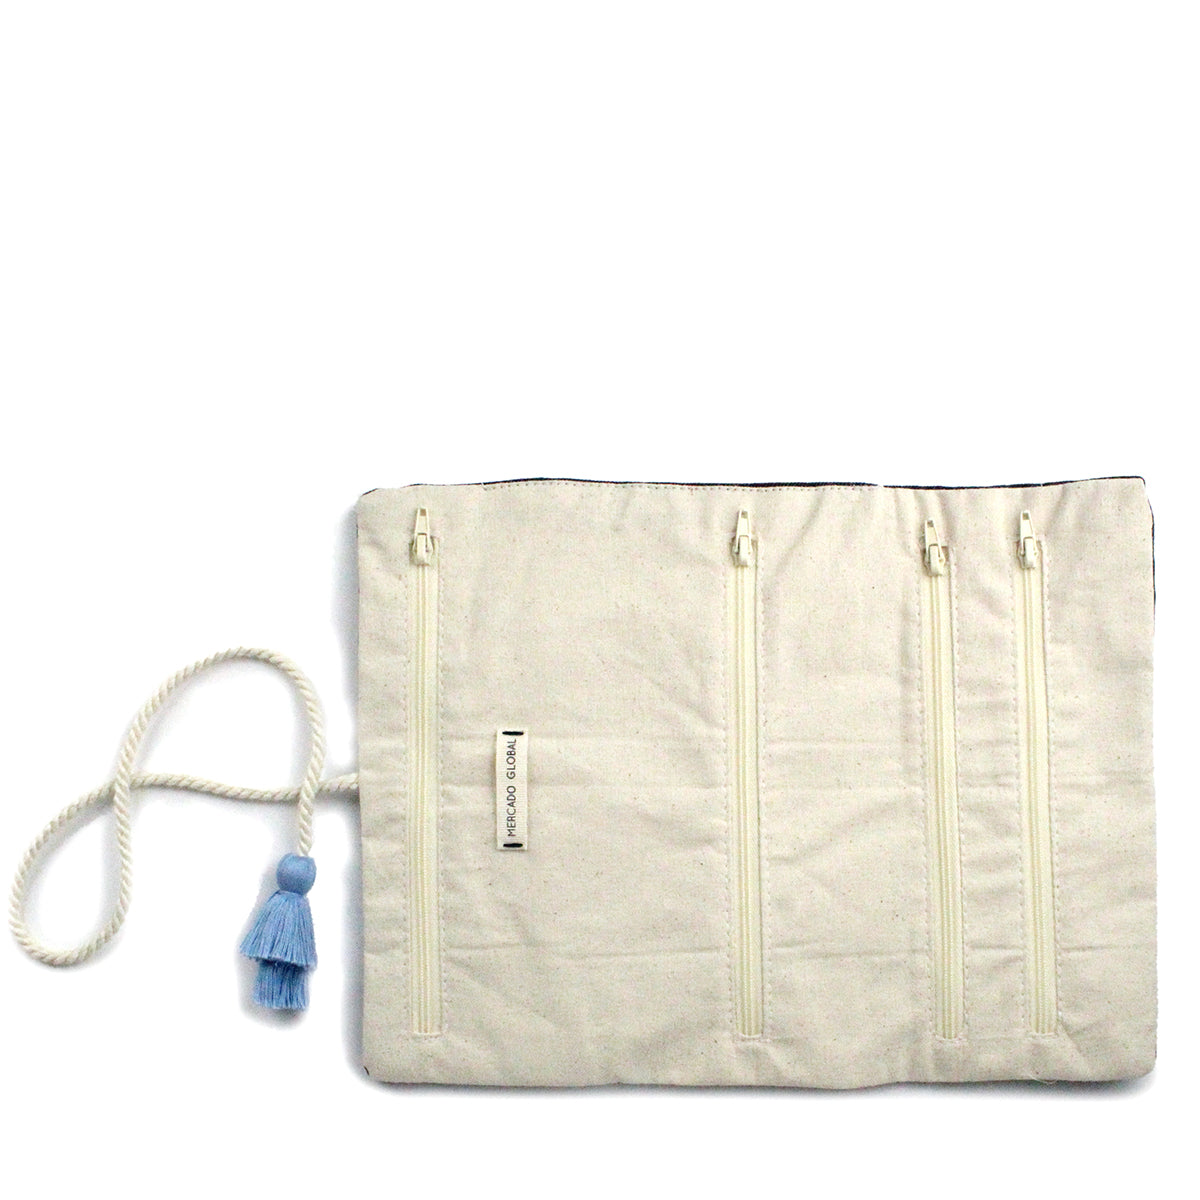 Hand Woven Artisan Lilia Jewelry Denim Roll. It is displayed open showing four zippered pockets. The white cord and blue tassel are attached to the top of the jewelery roll. It has a beige lining fabric.